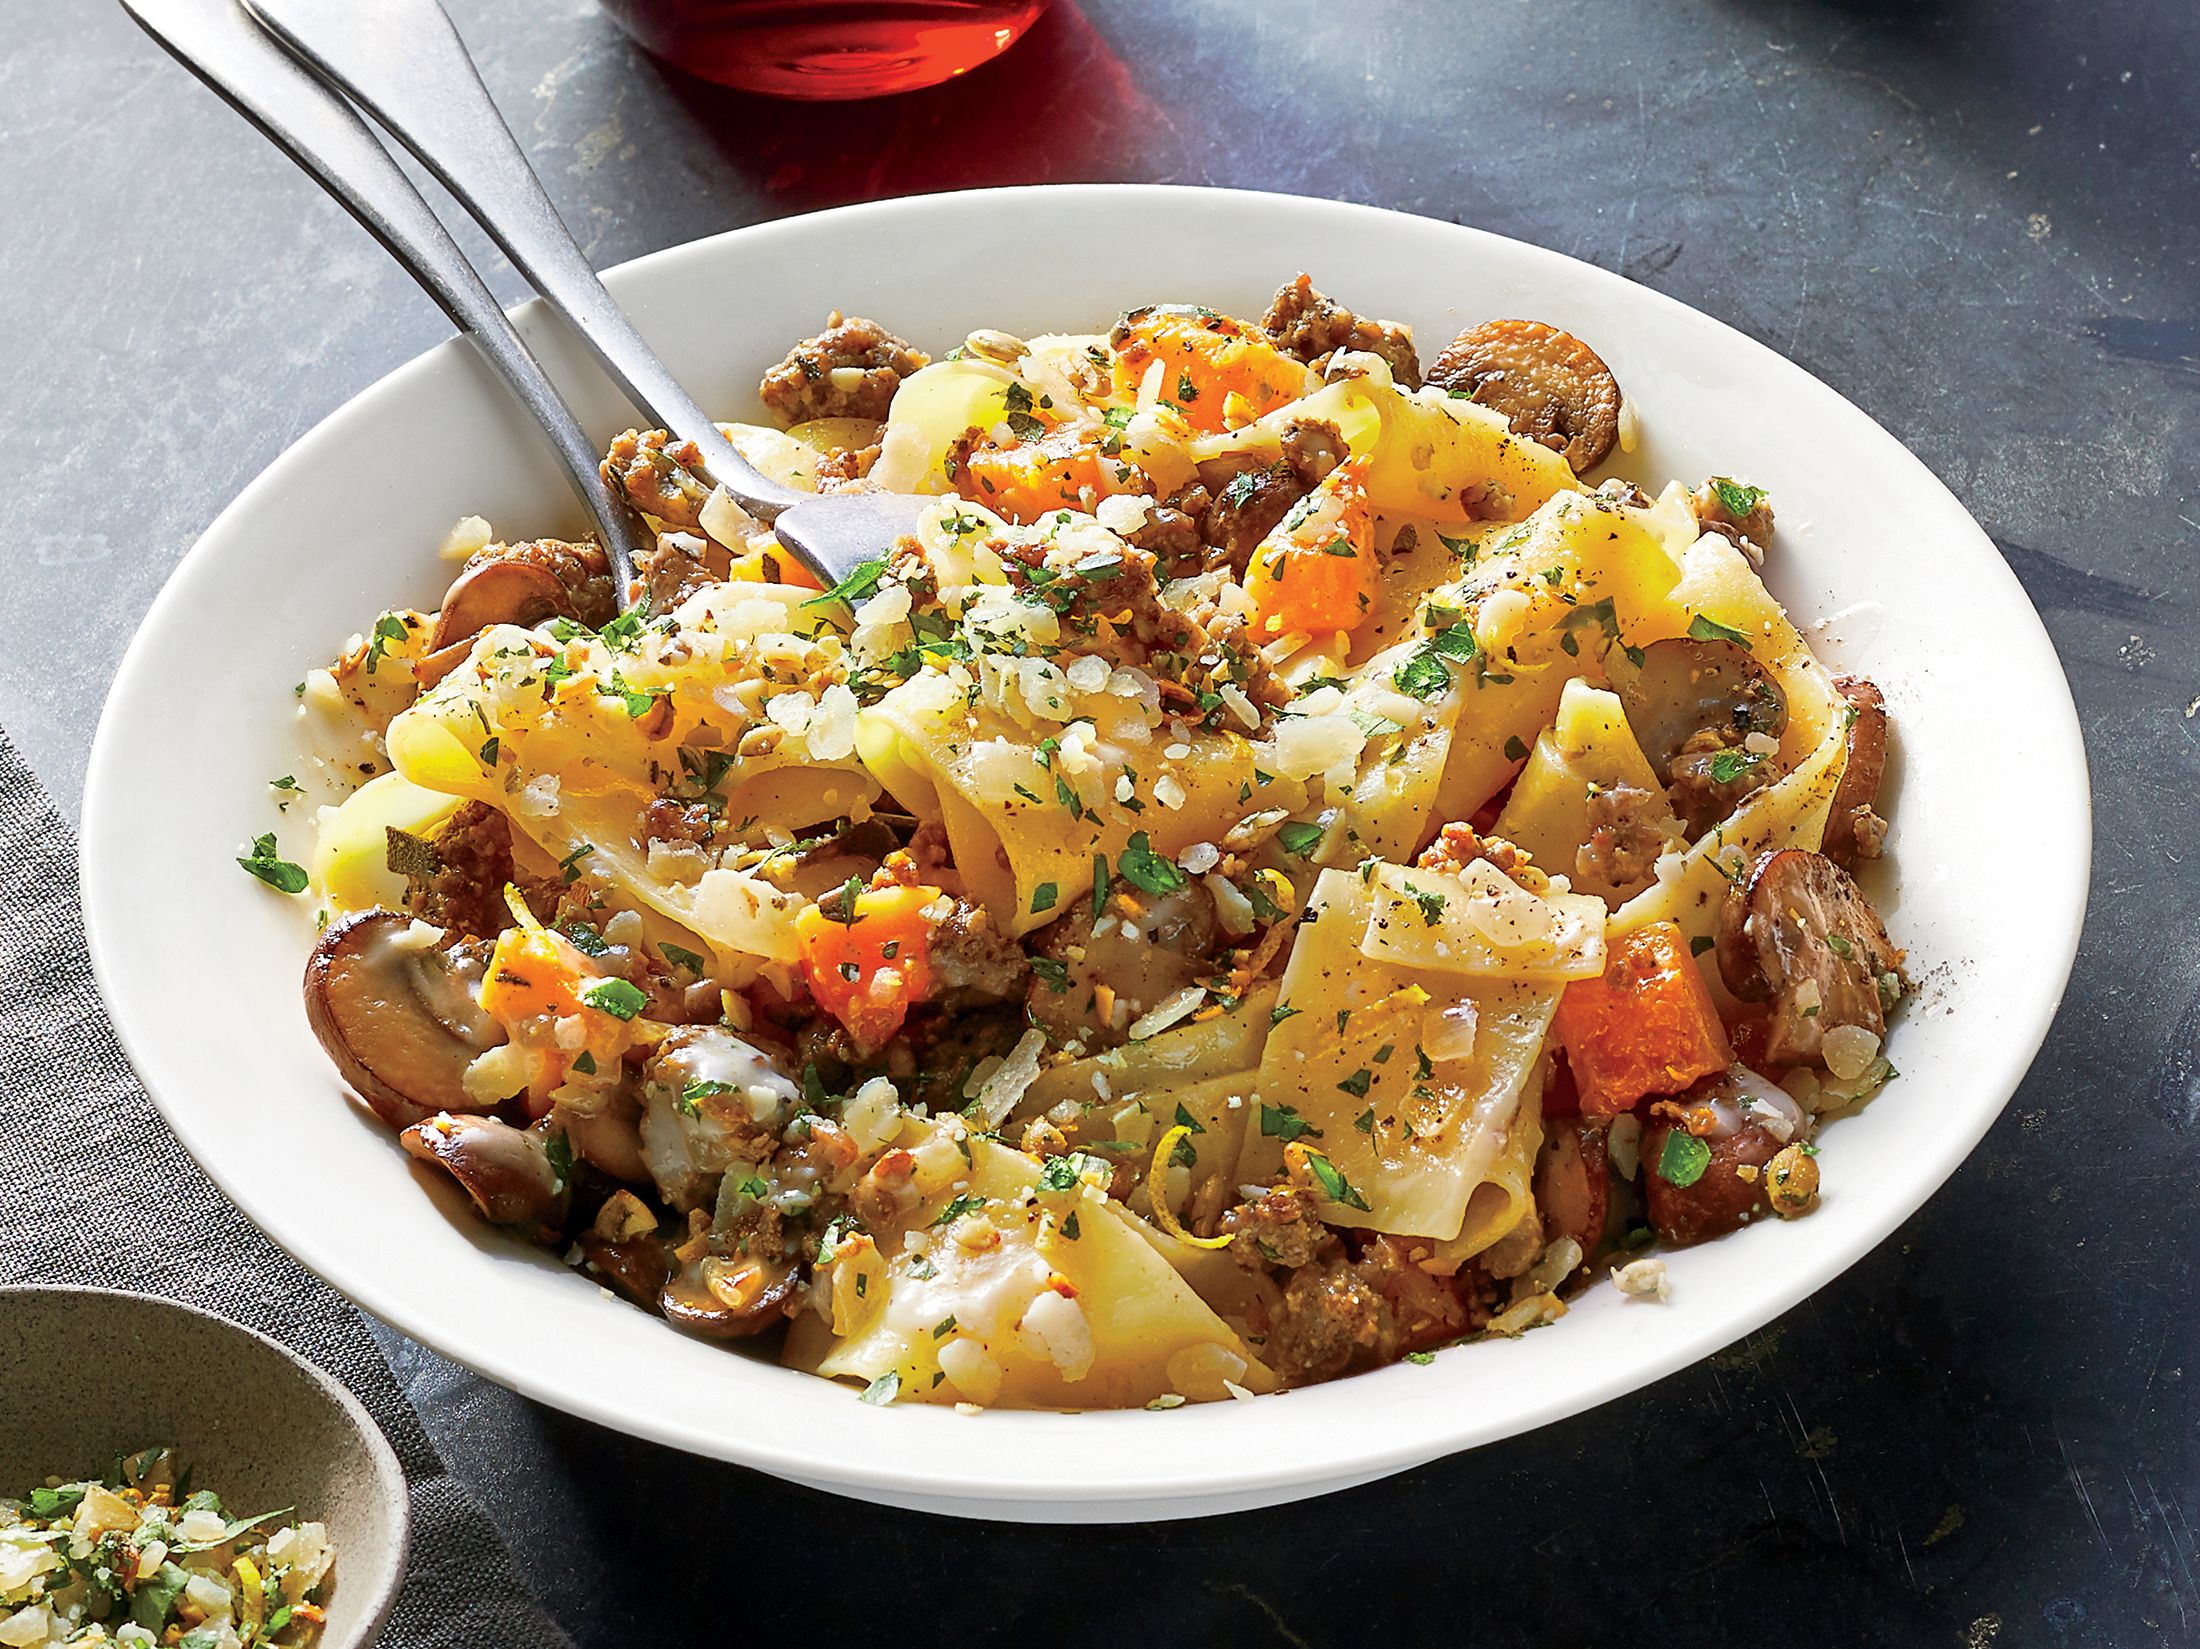 Sausage and Mushroom Pasta With Butternut Squash